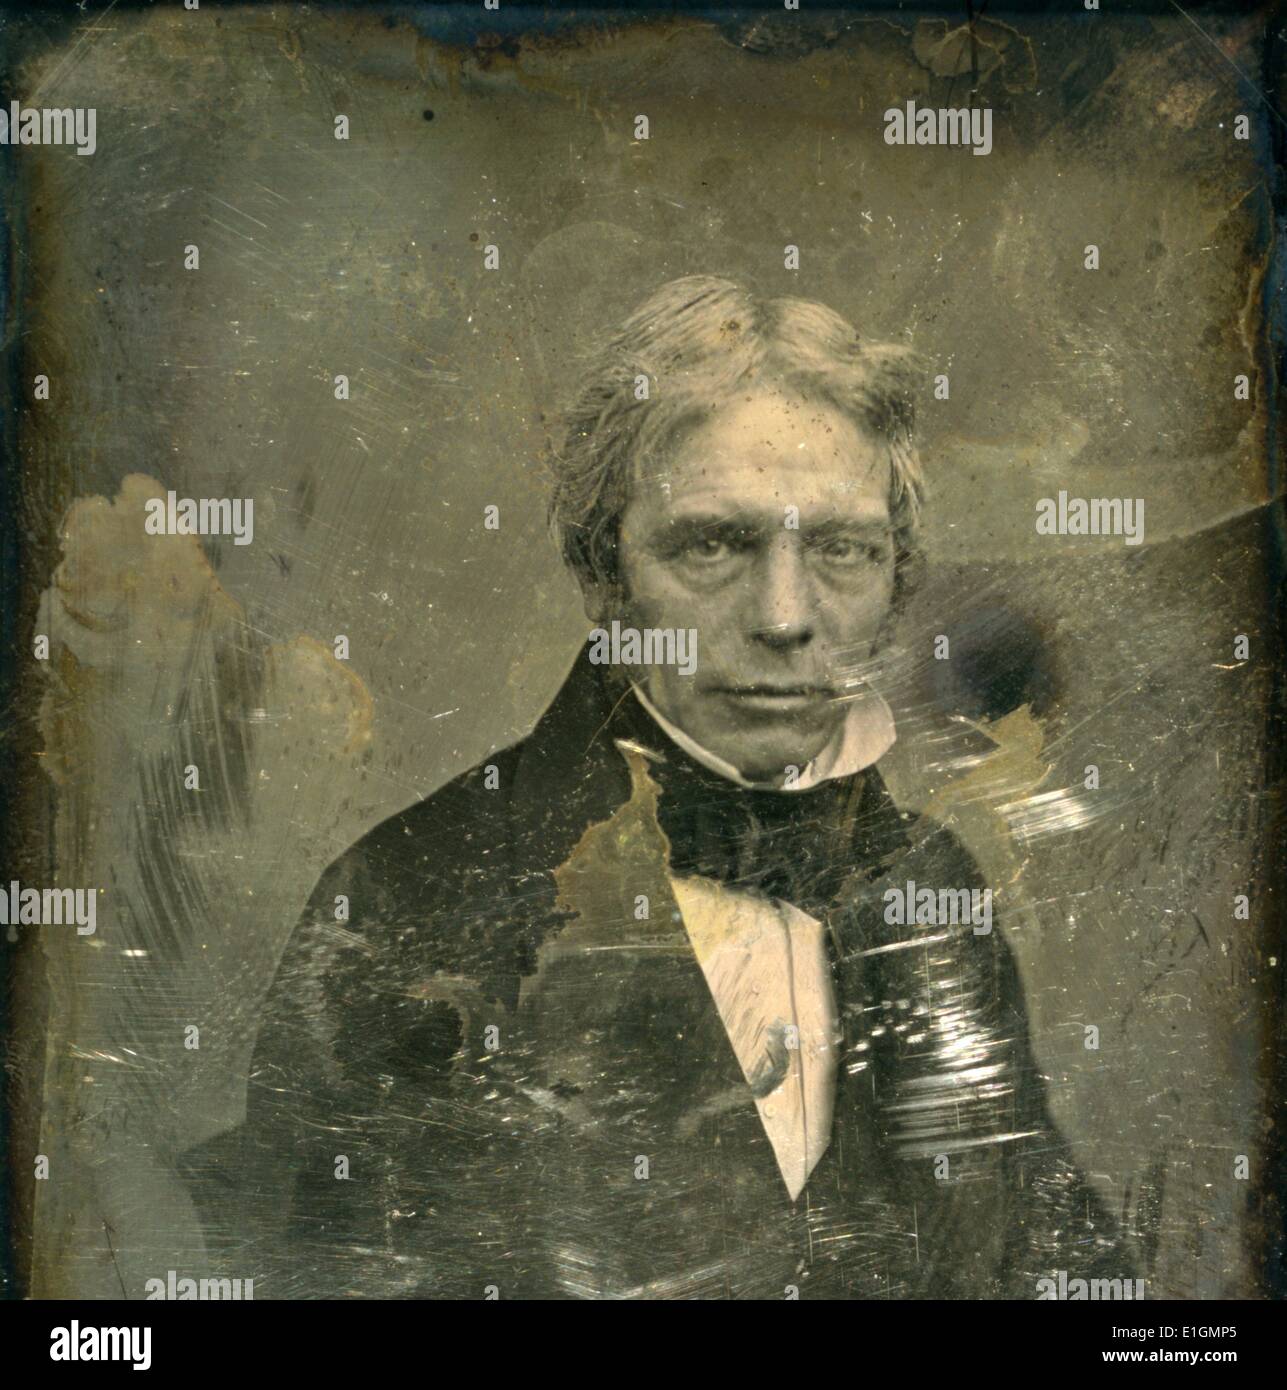 Photographic print of Michael Faraday (1791-1867) an English scientist who contributed to the fields of electromagnetism and electrochemistry. Dated 1850 Stock Photo